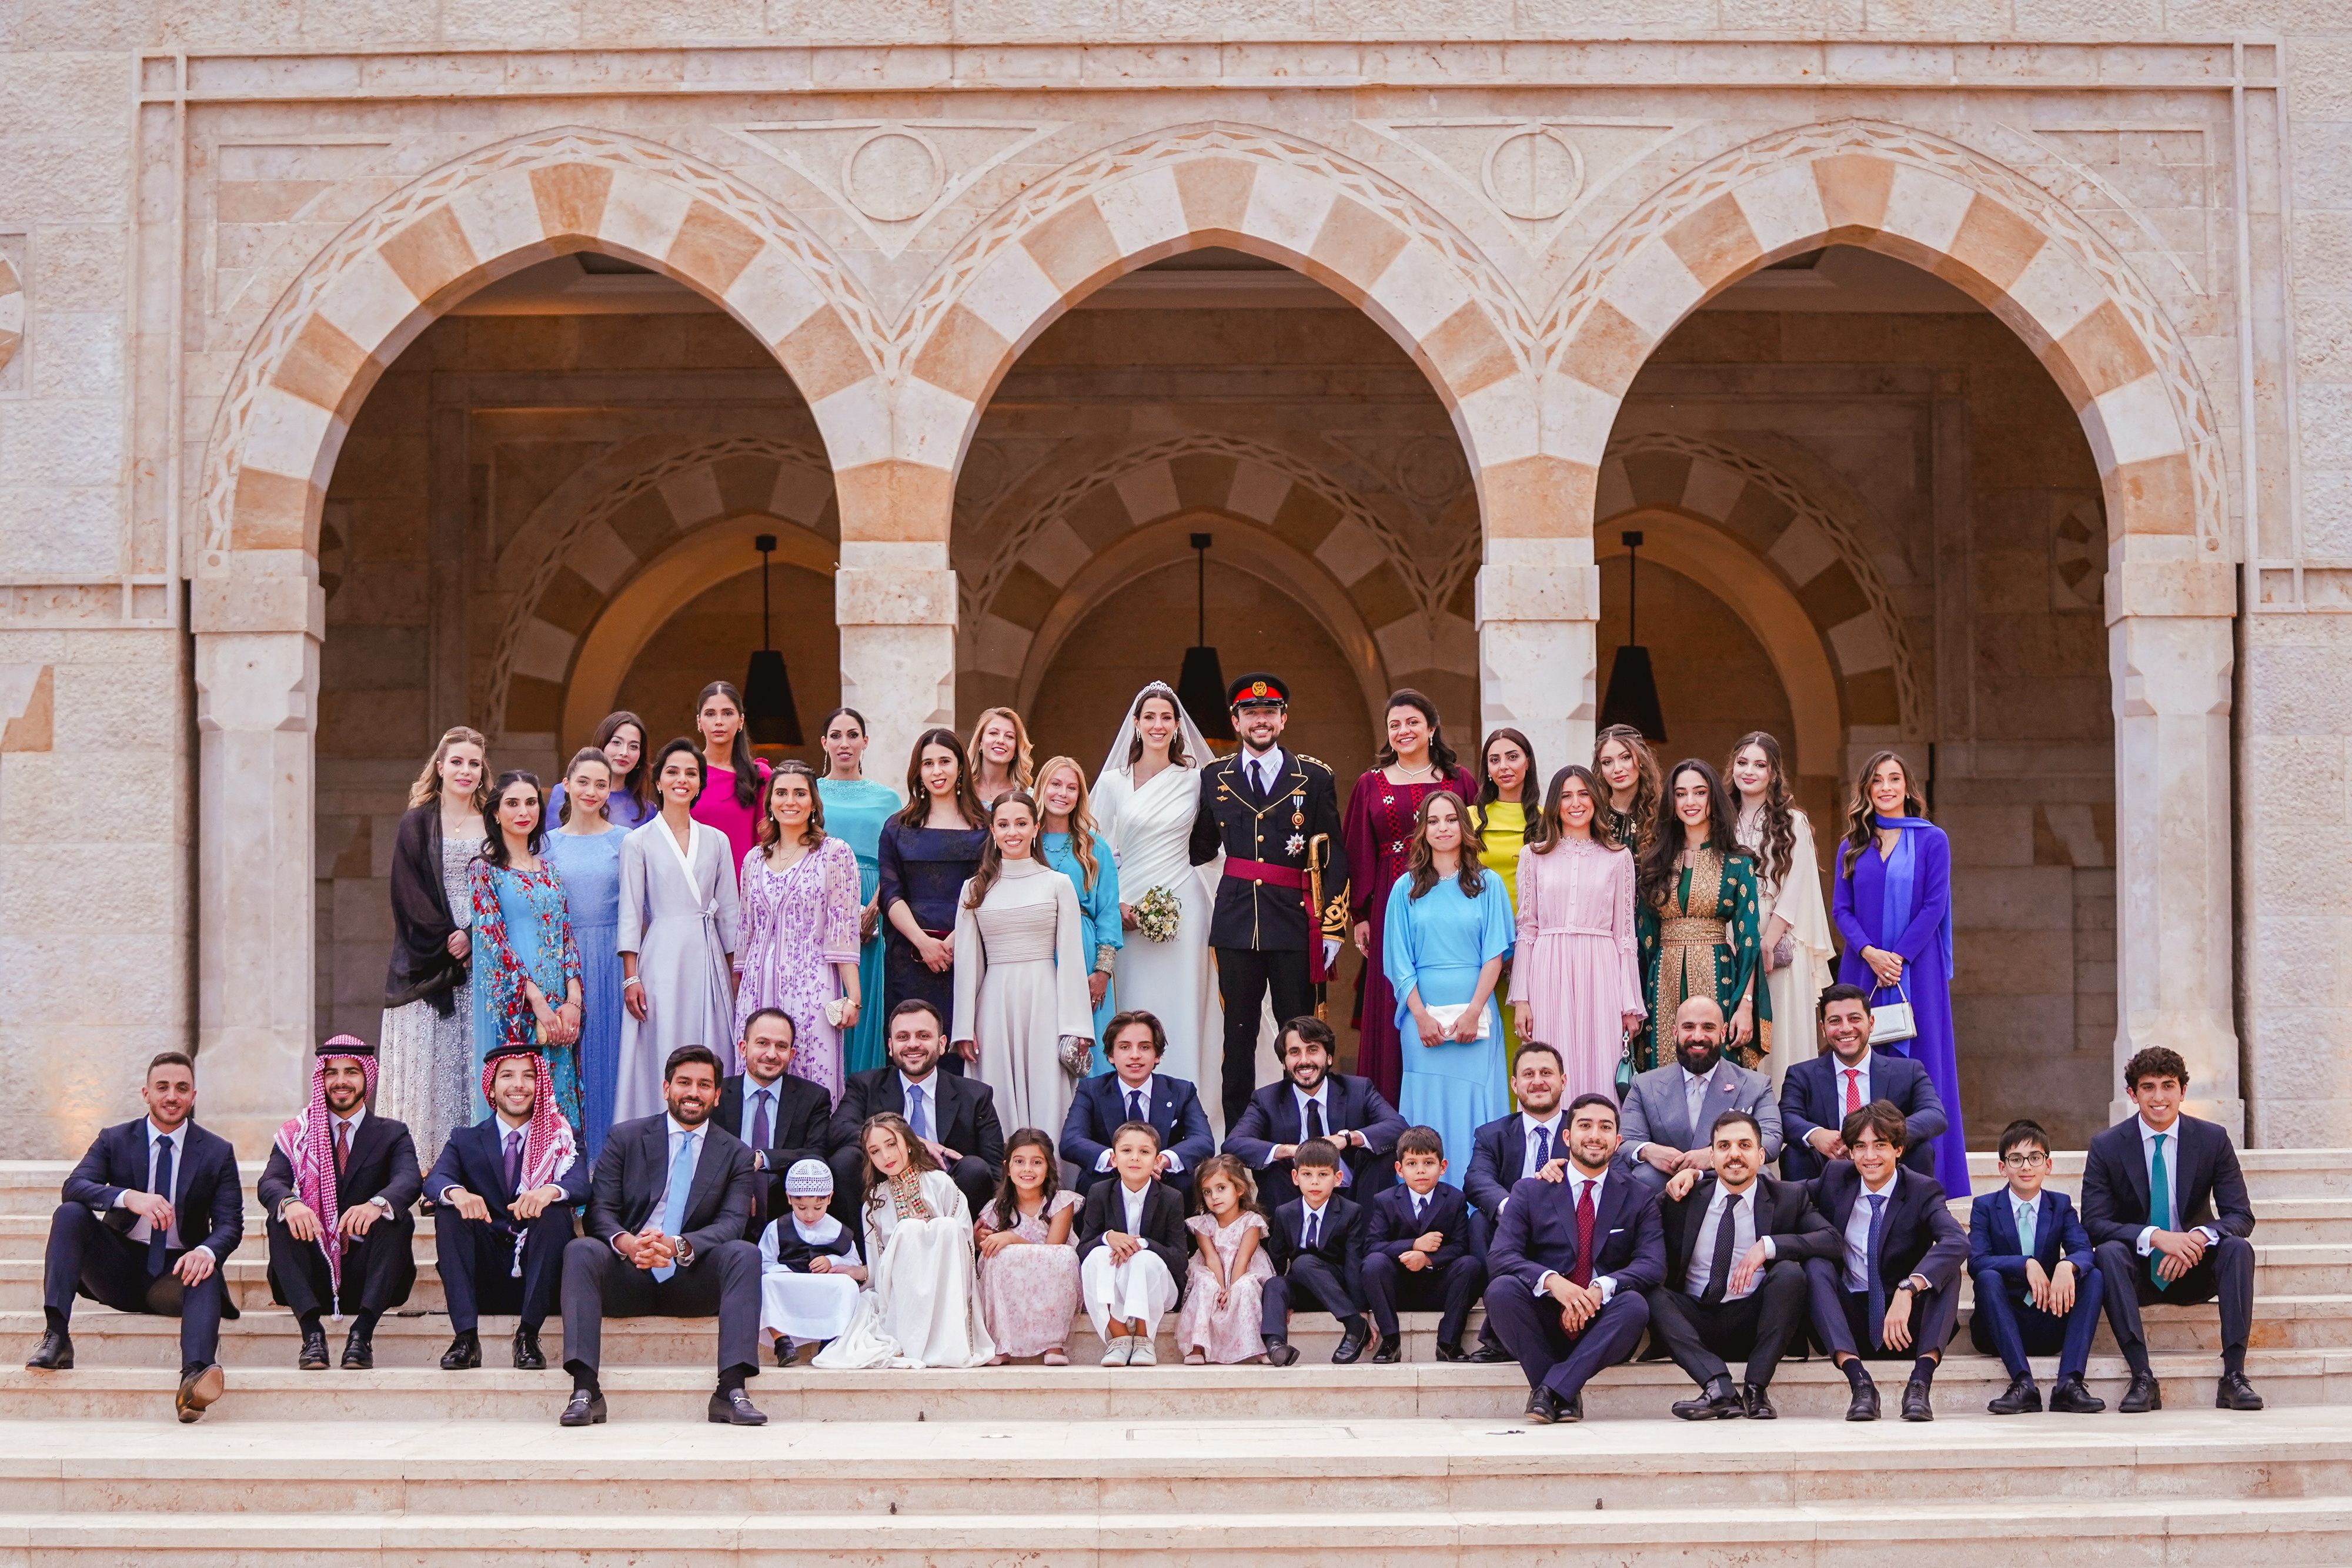 prince hussein and princess rajwa of jordan are expecting their first child